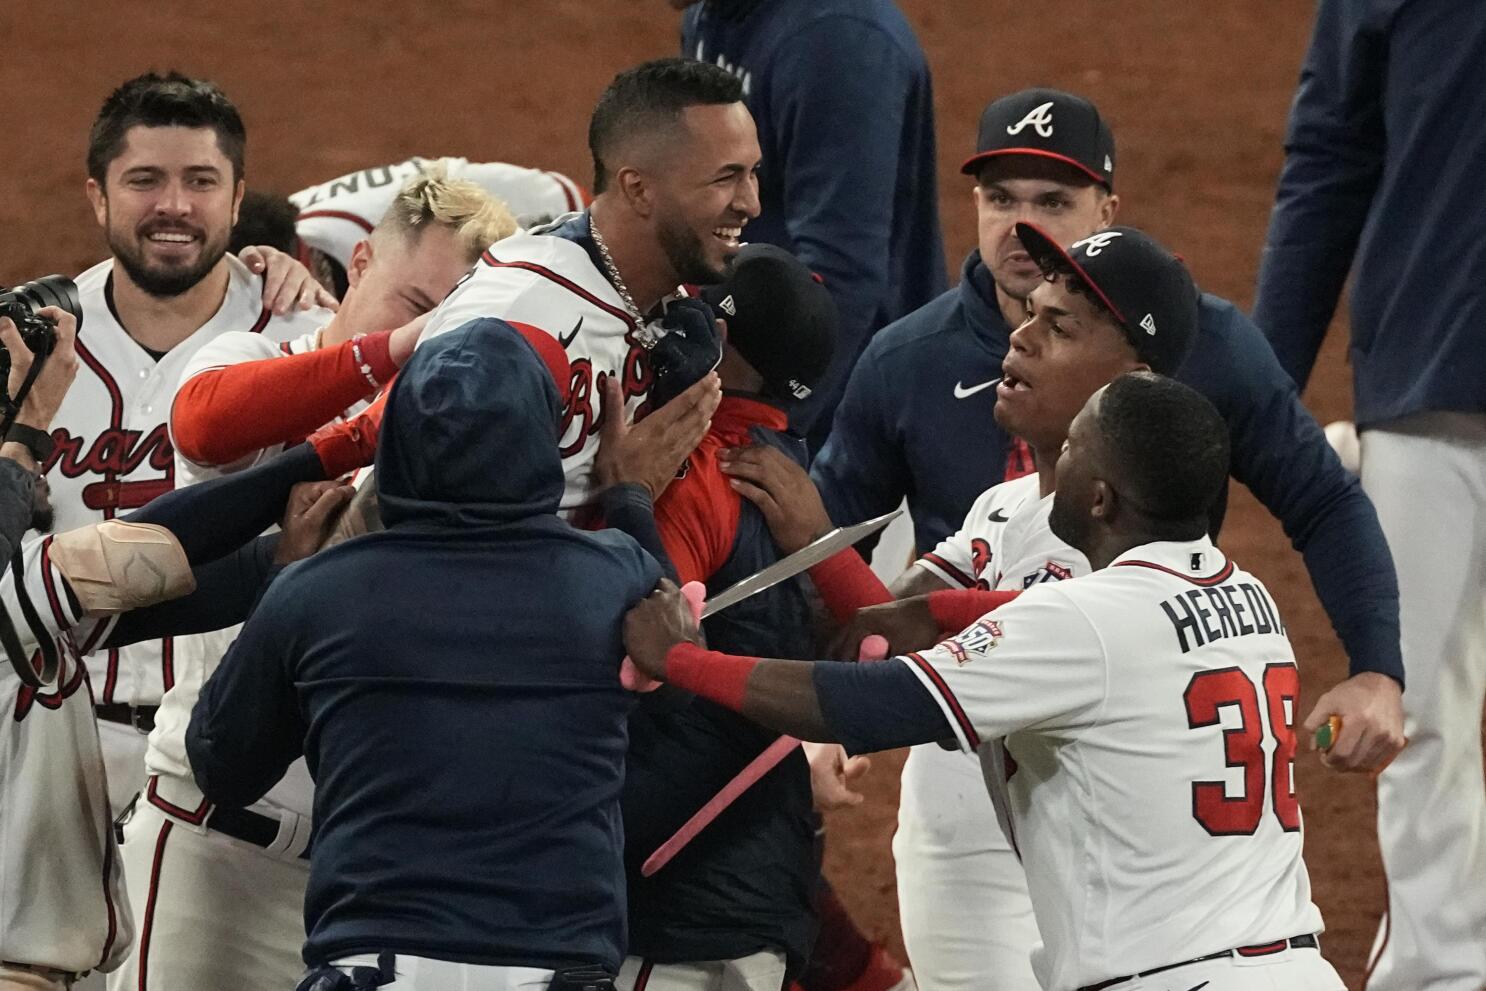 Eddie Rosario powers Braves to 9-2 win over Dodgers in Game 4 of